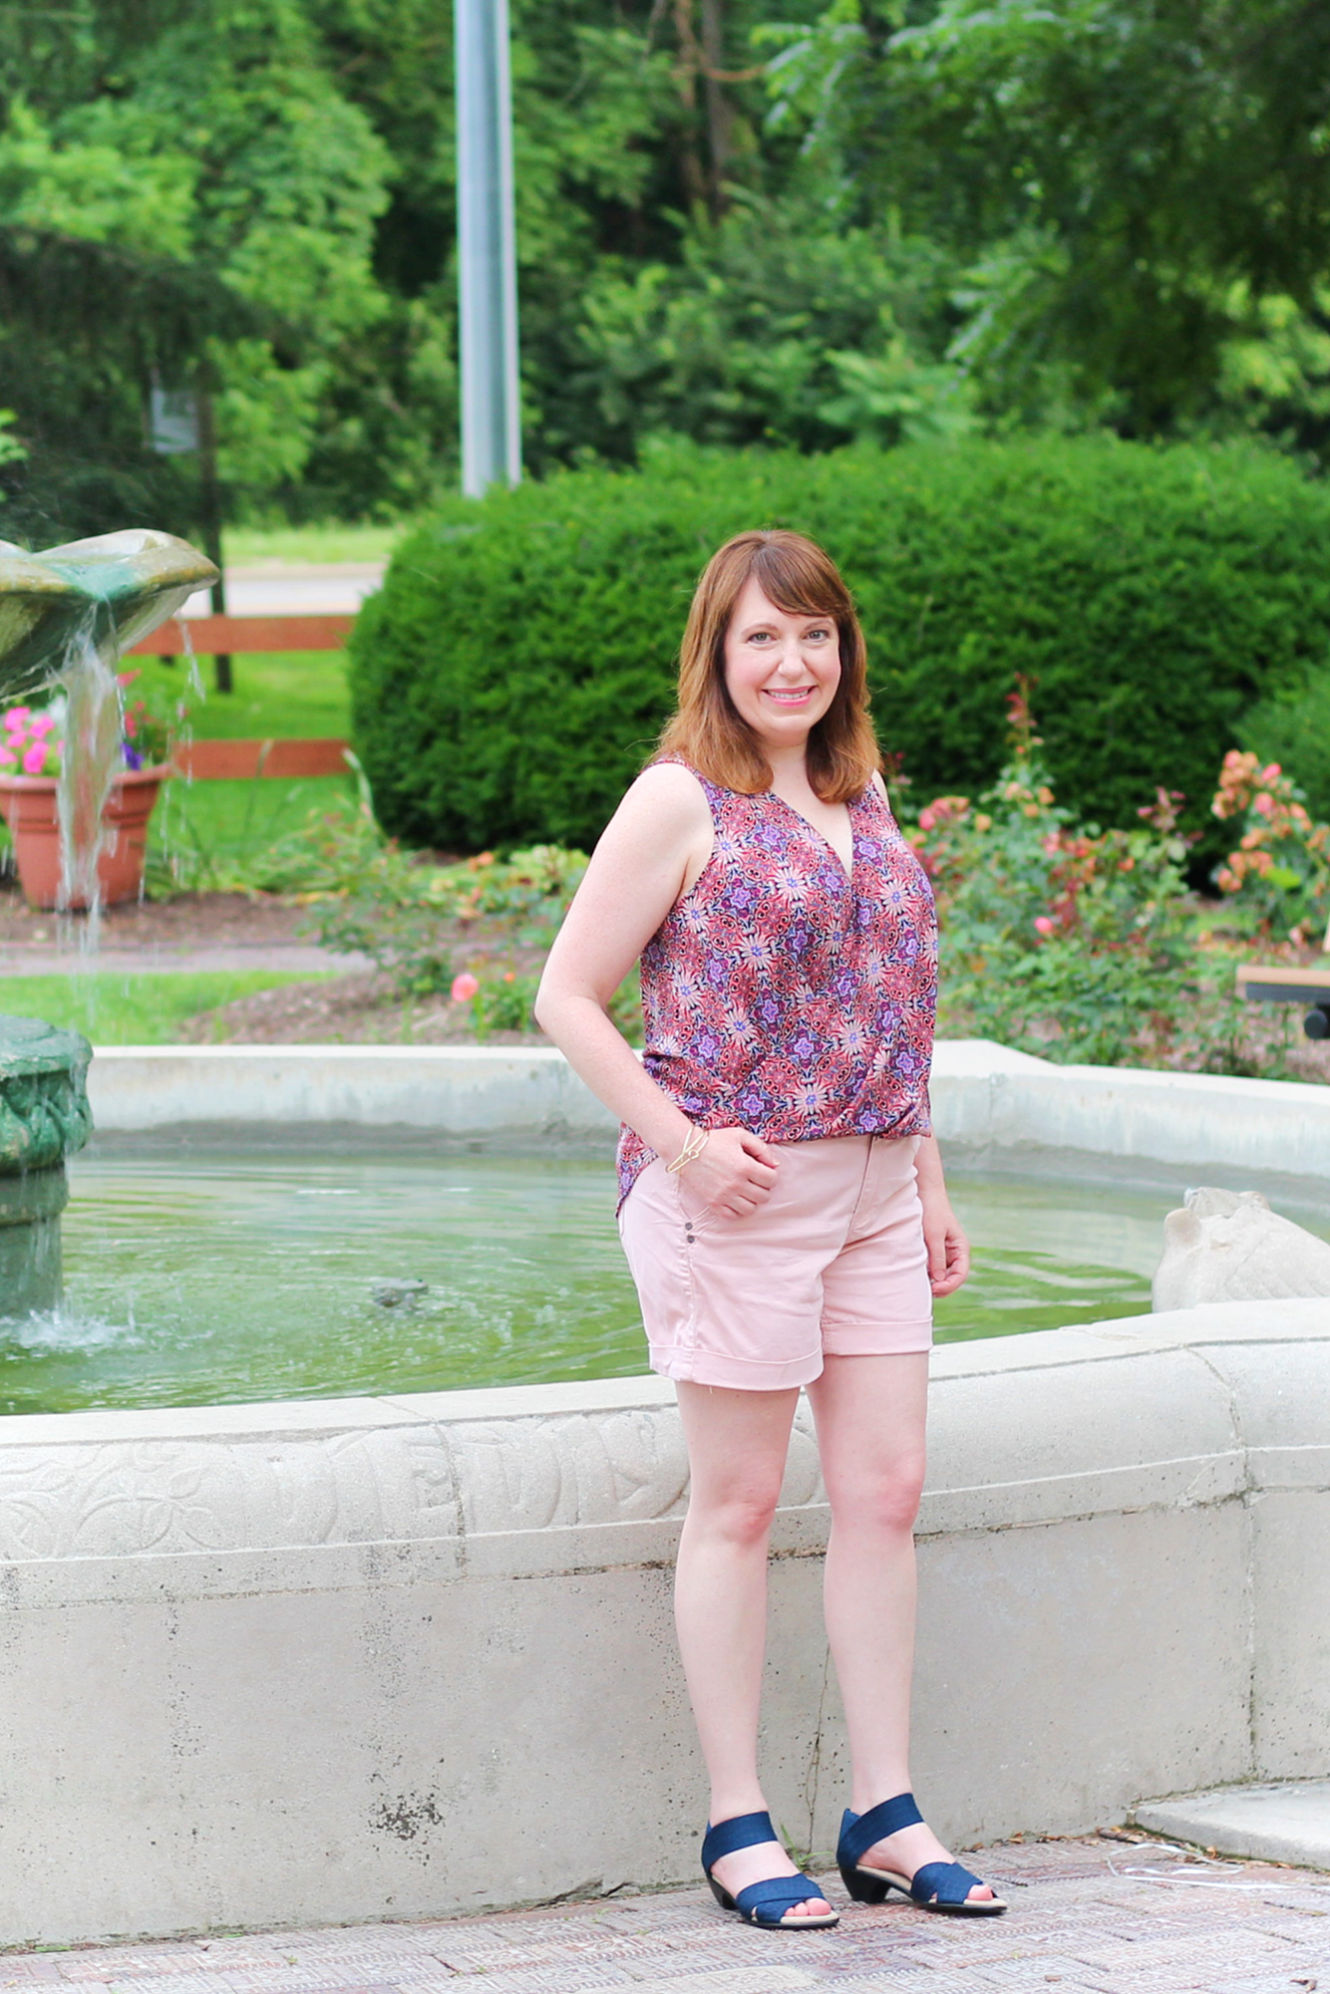 Pink Daisy Tank Top #summeroutfit #fashionover40 #over40fashionblog